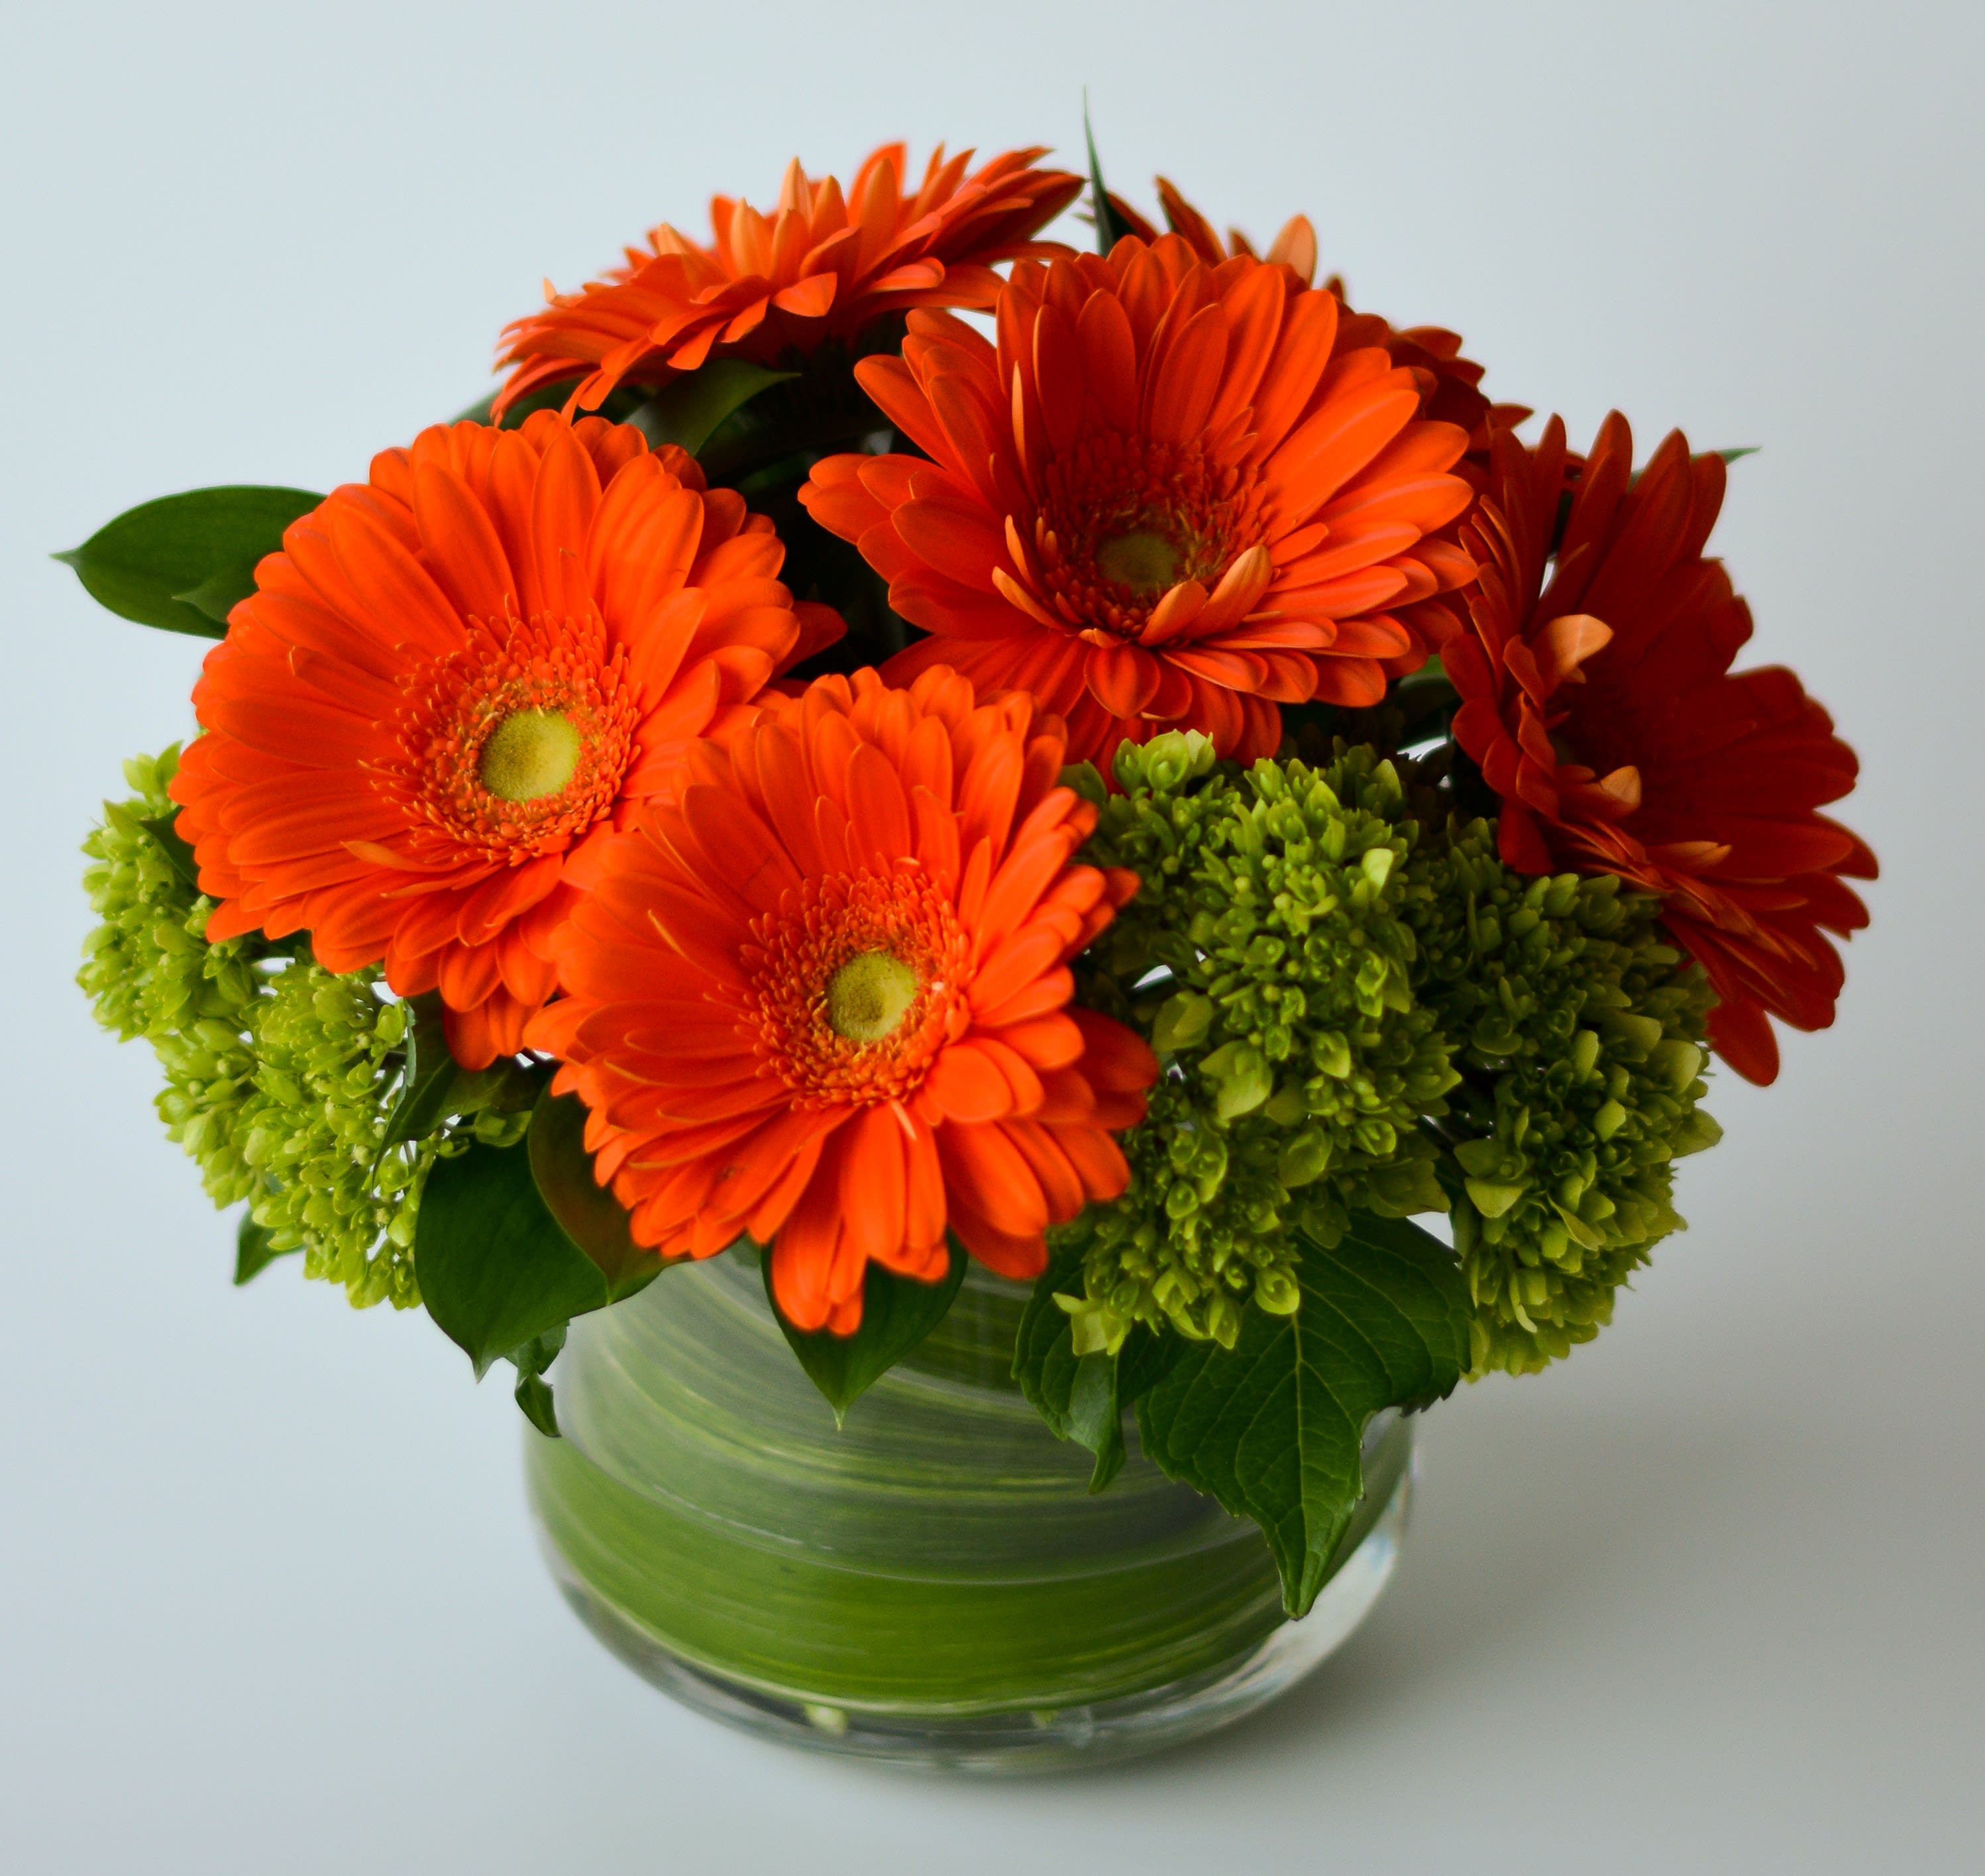 brighten your day - a nice arrangement of gerberas mix with green hydrangea in a clear vase with a lead around